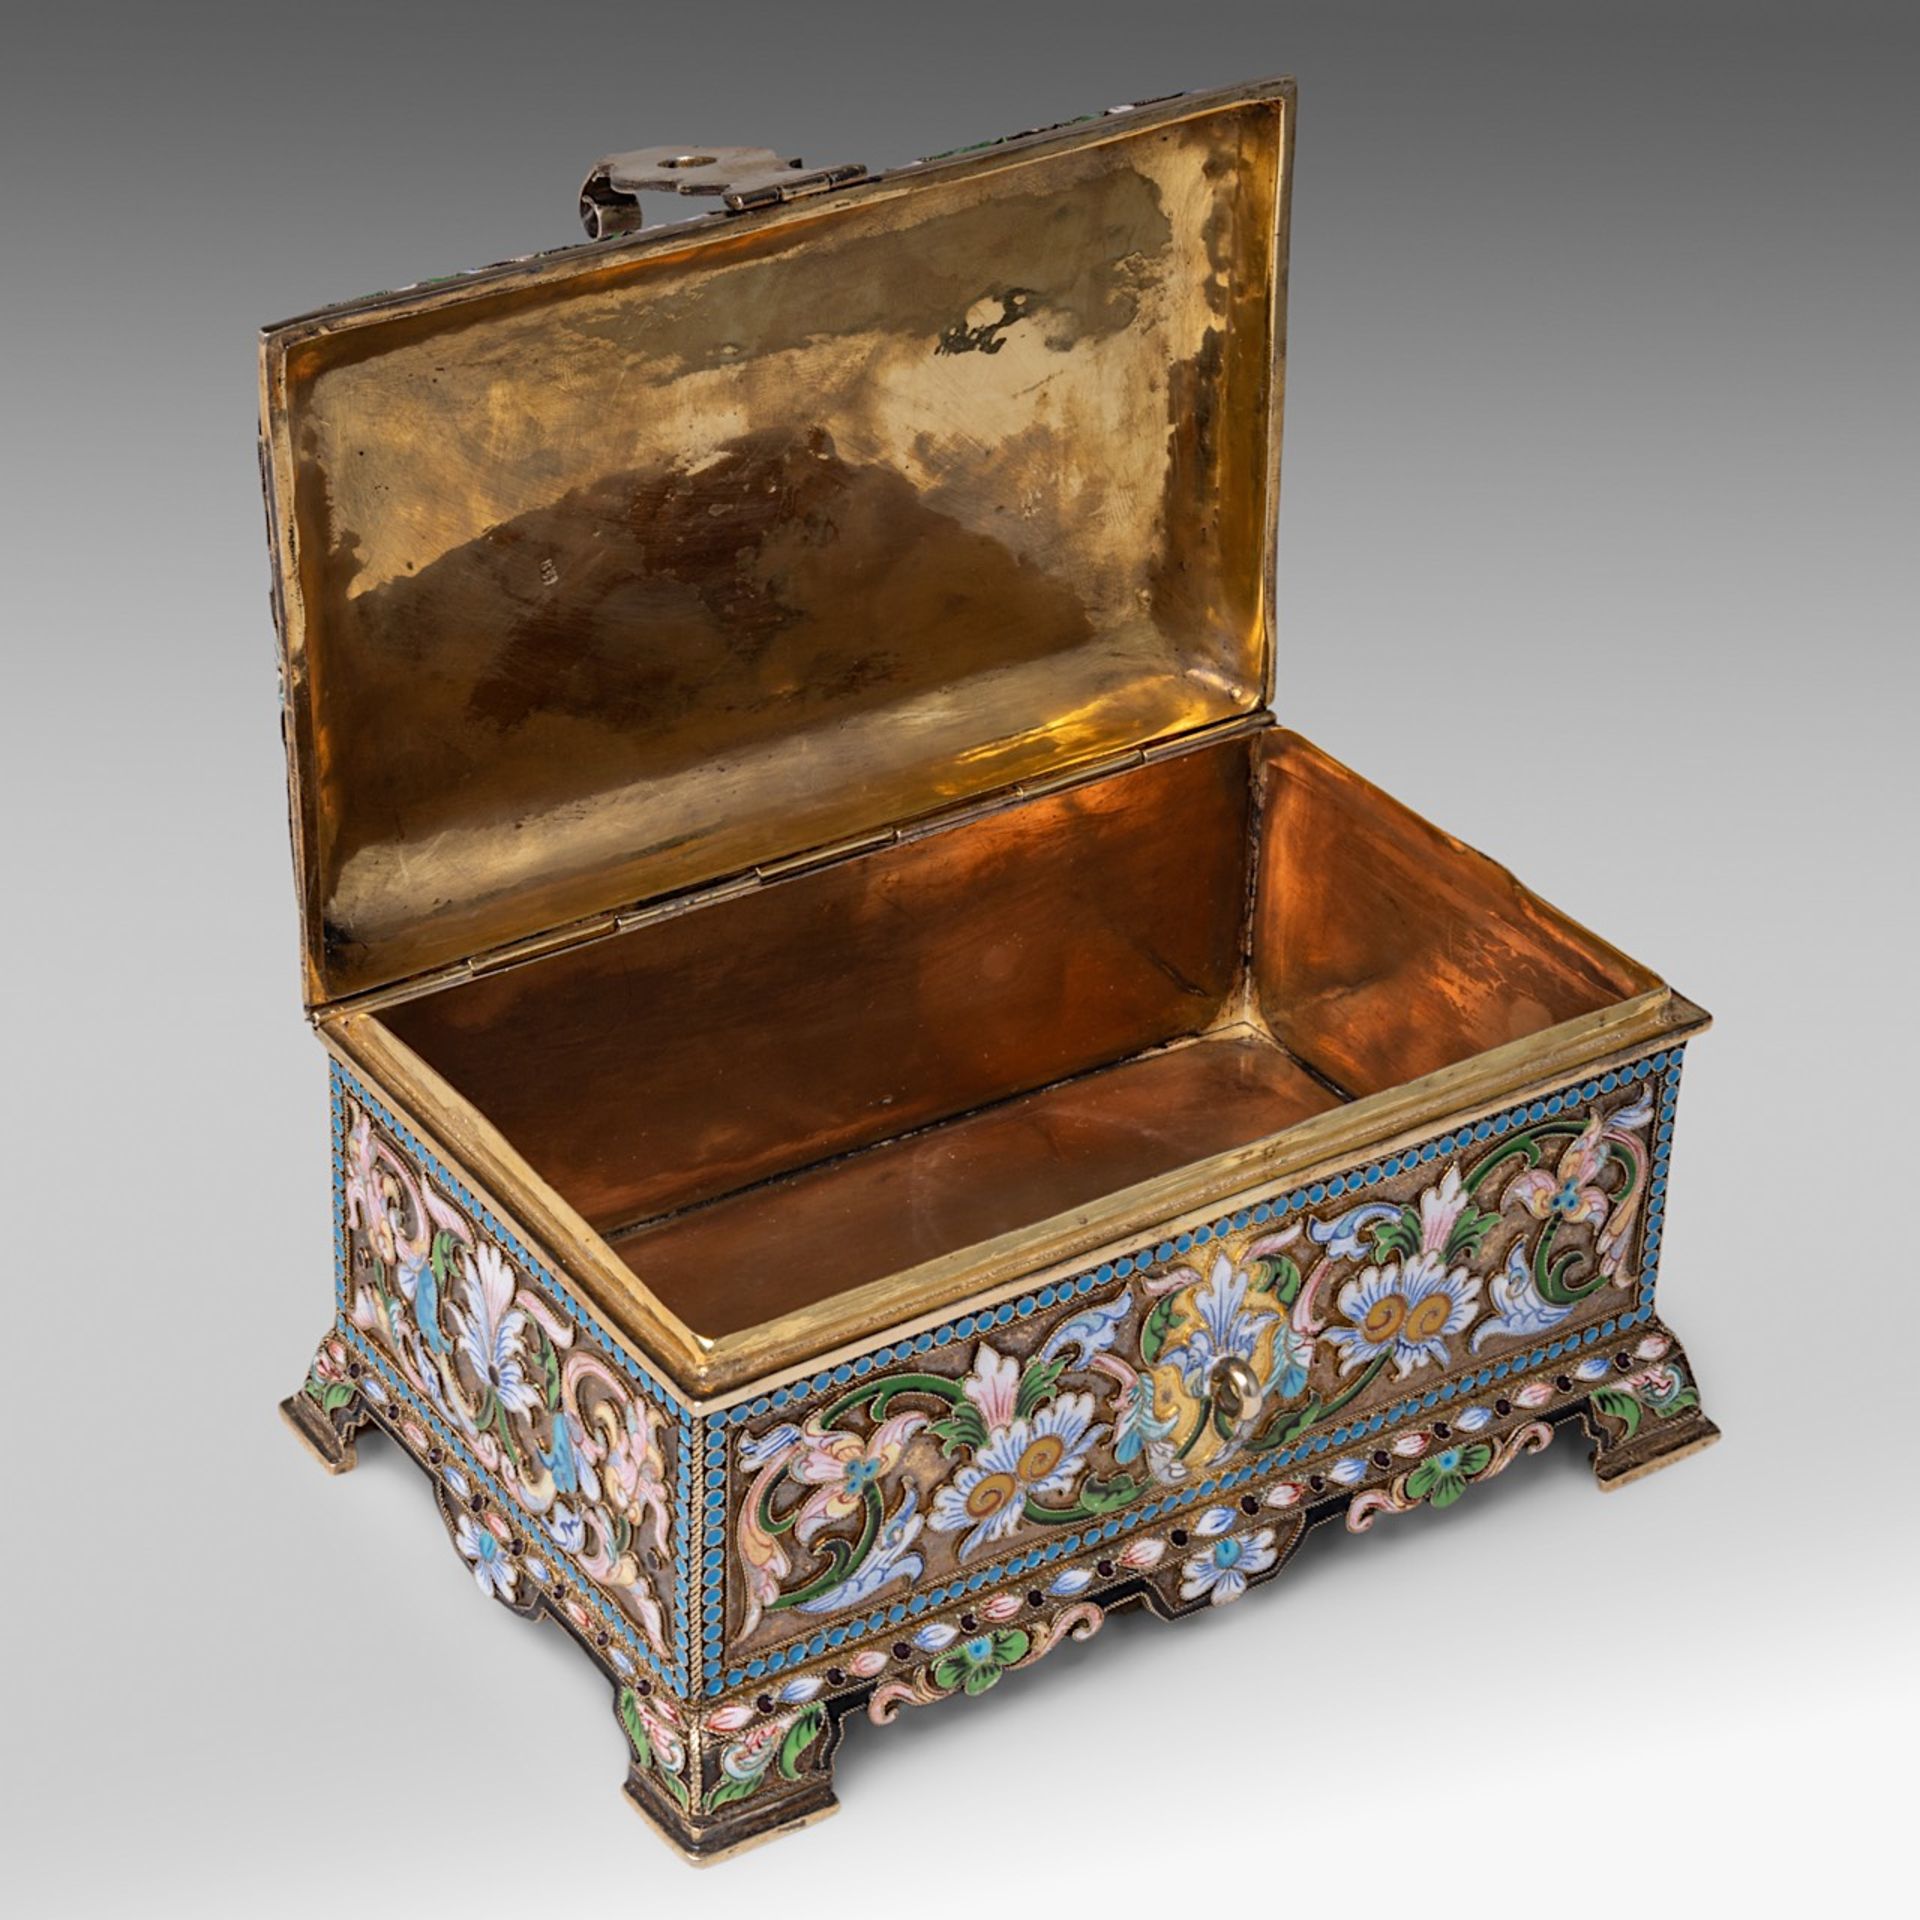 A Russian silver and enamel floral decorated jewellery box, hallmarked 84 Zolotniki, H 8 - 15 - 10 c - Bild 9 aus 9